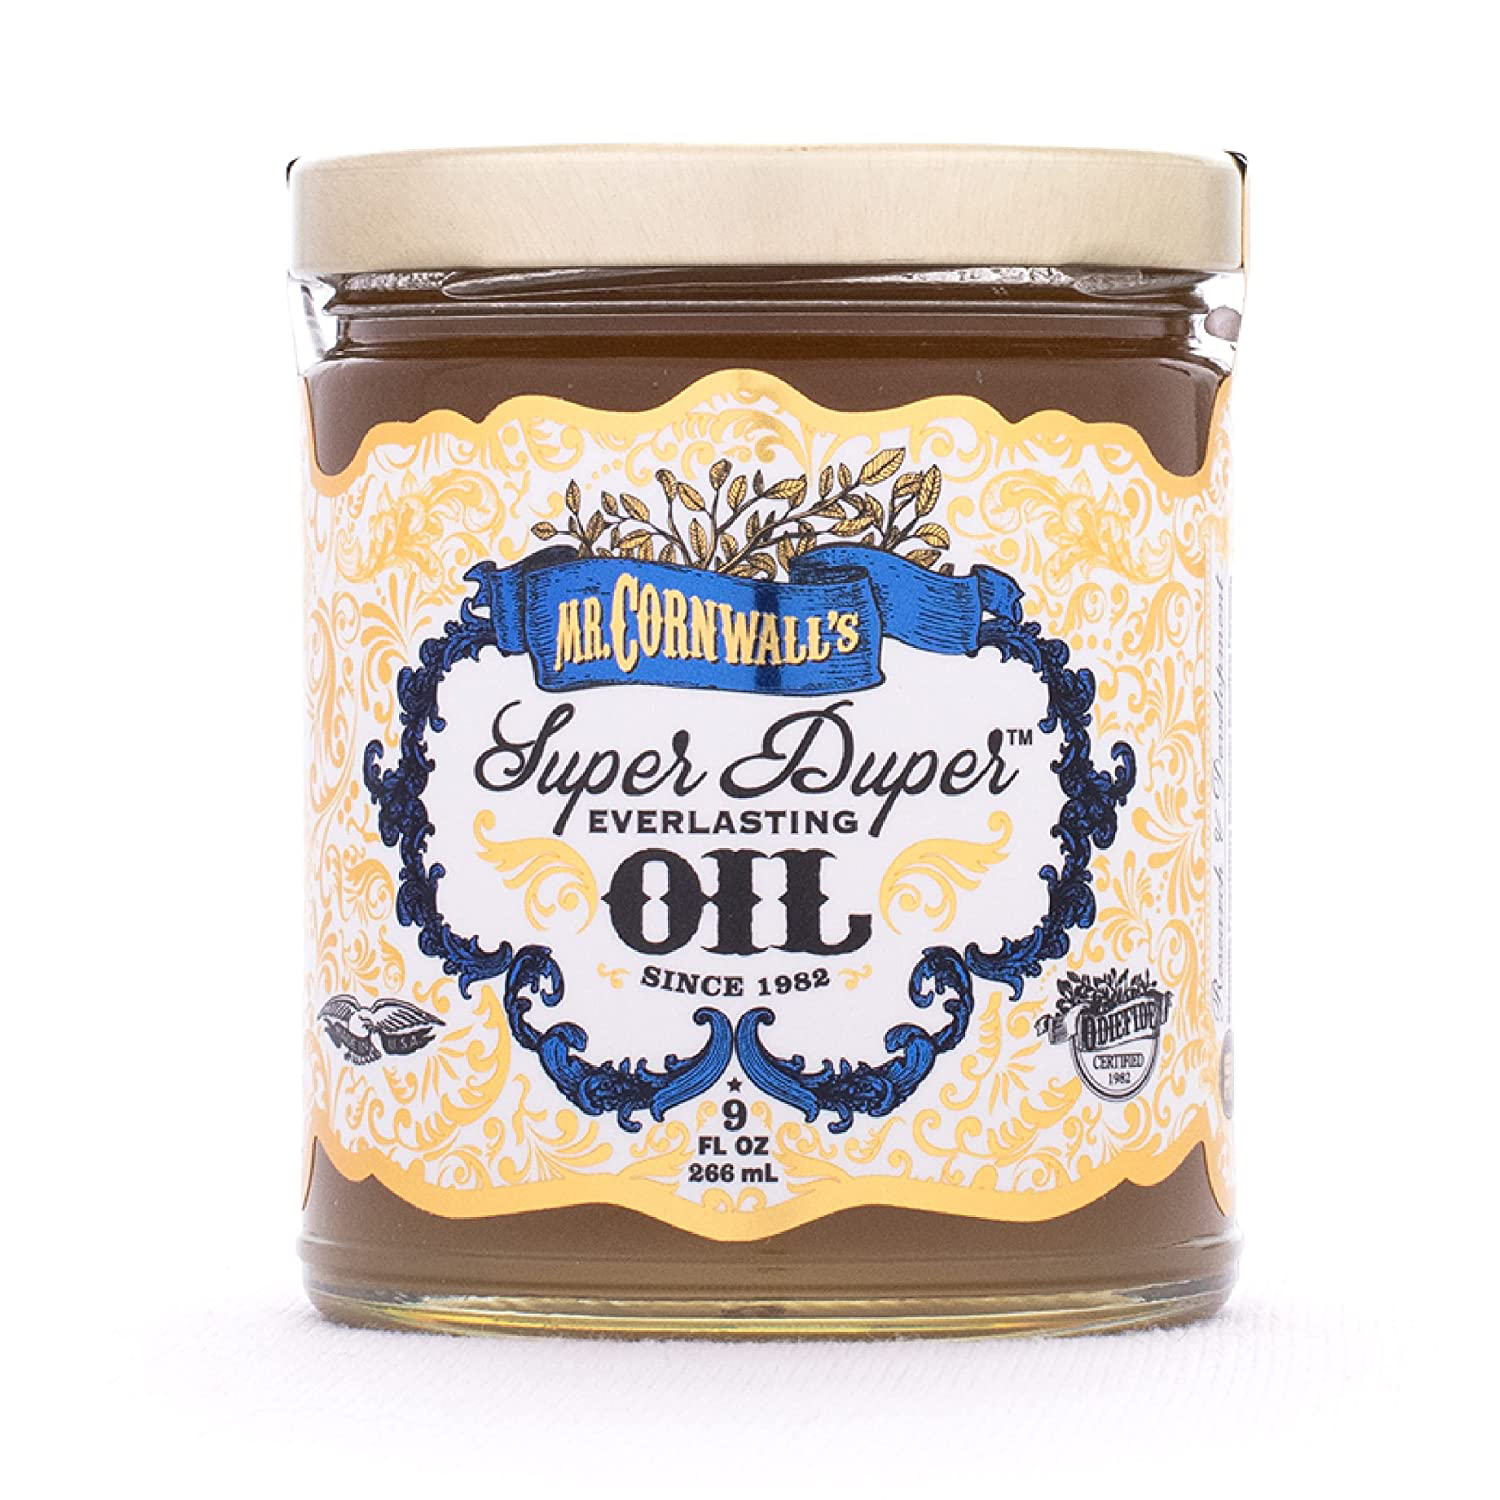 Odie's Oil Wood Butter